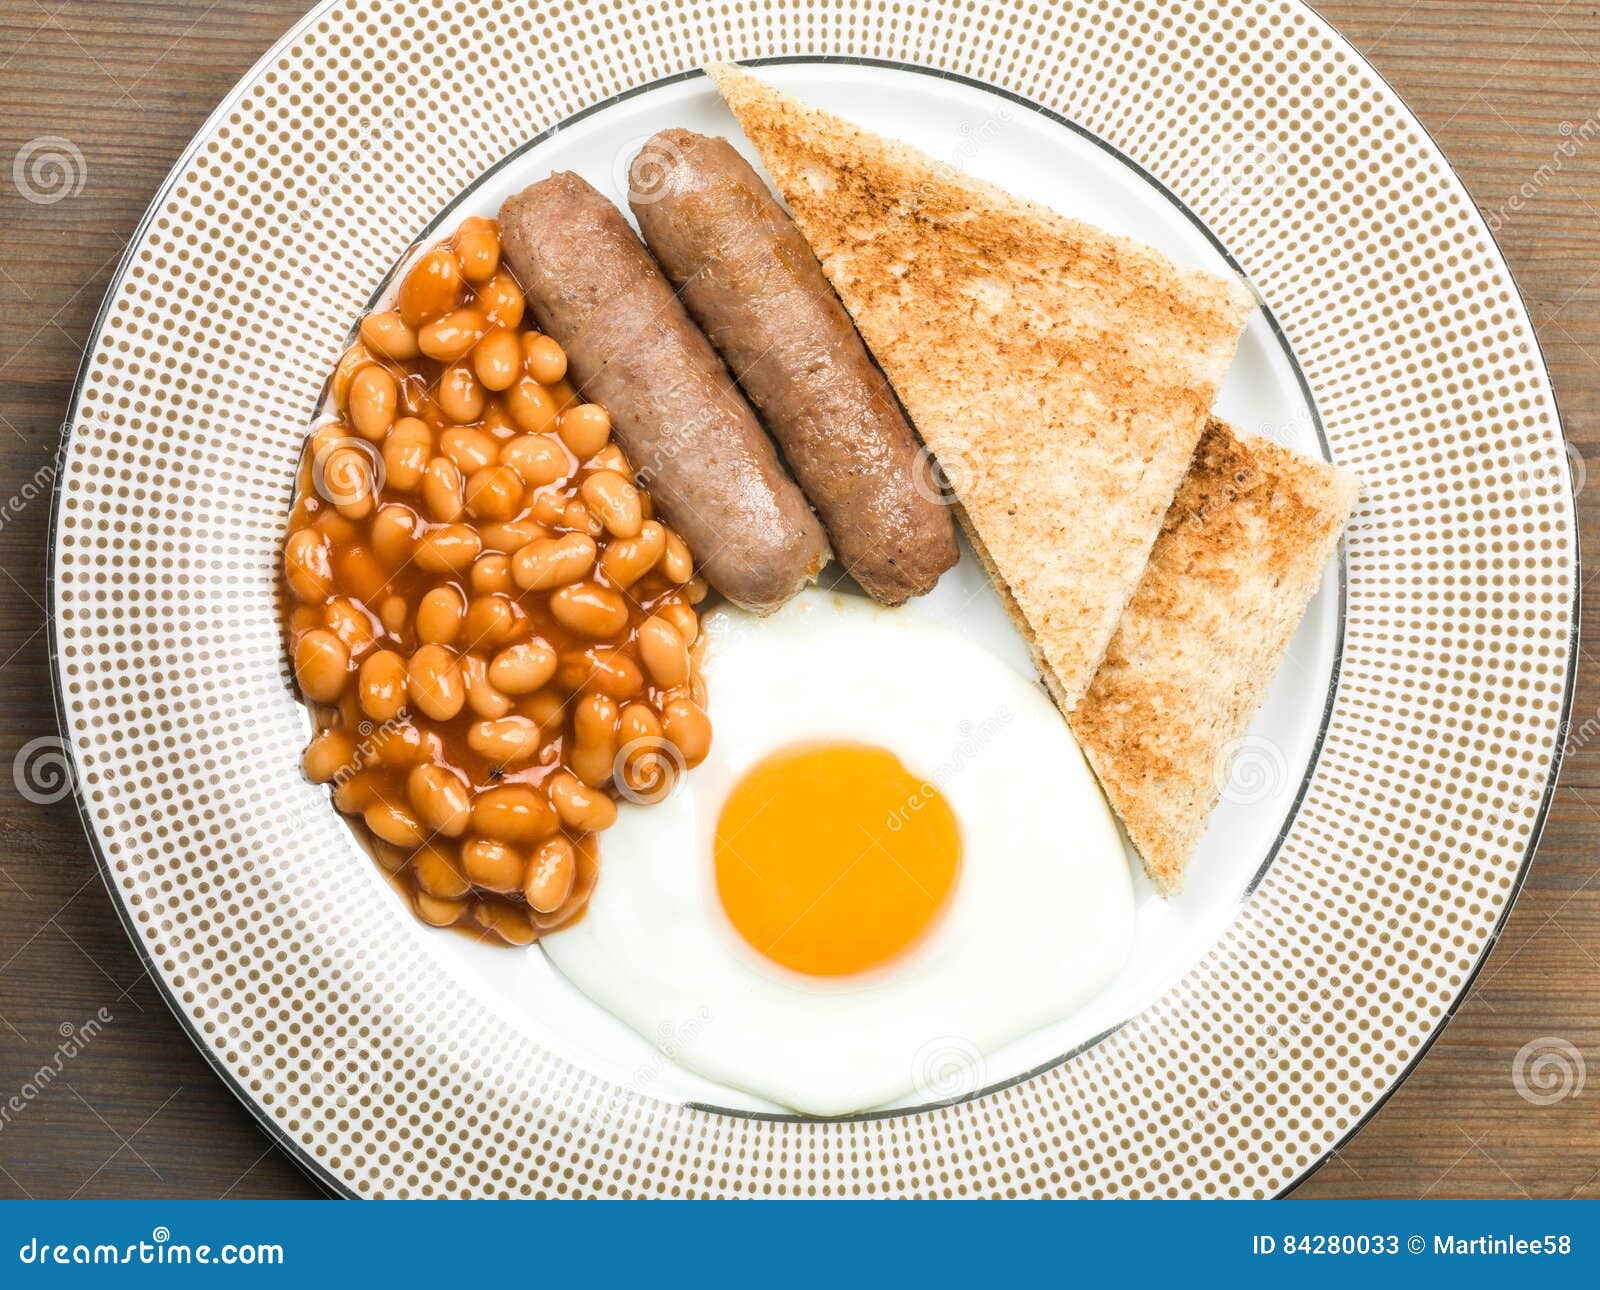 Sausage Egg and Baked Beans Cooked English Breakfast Stock Image ...